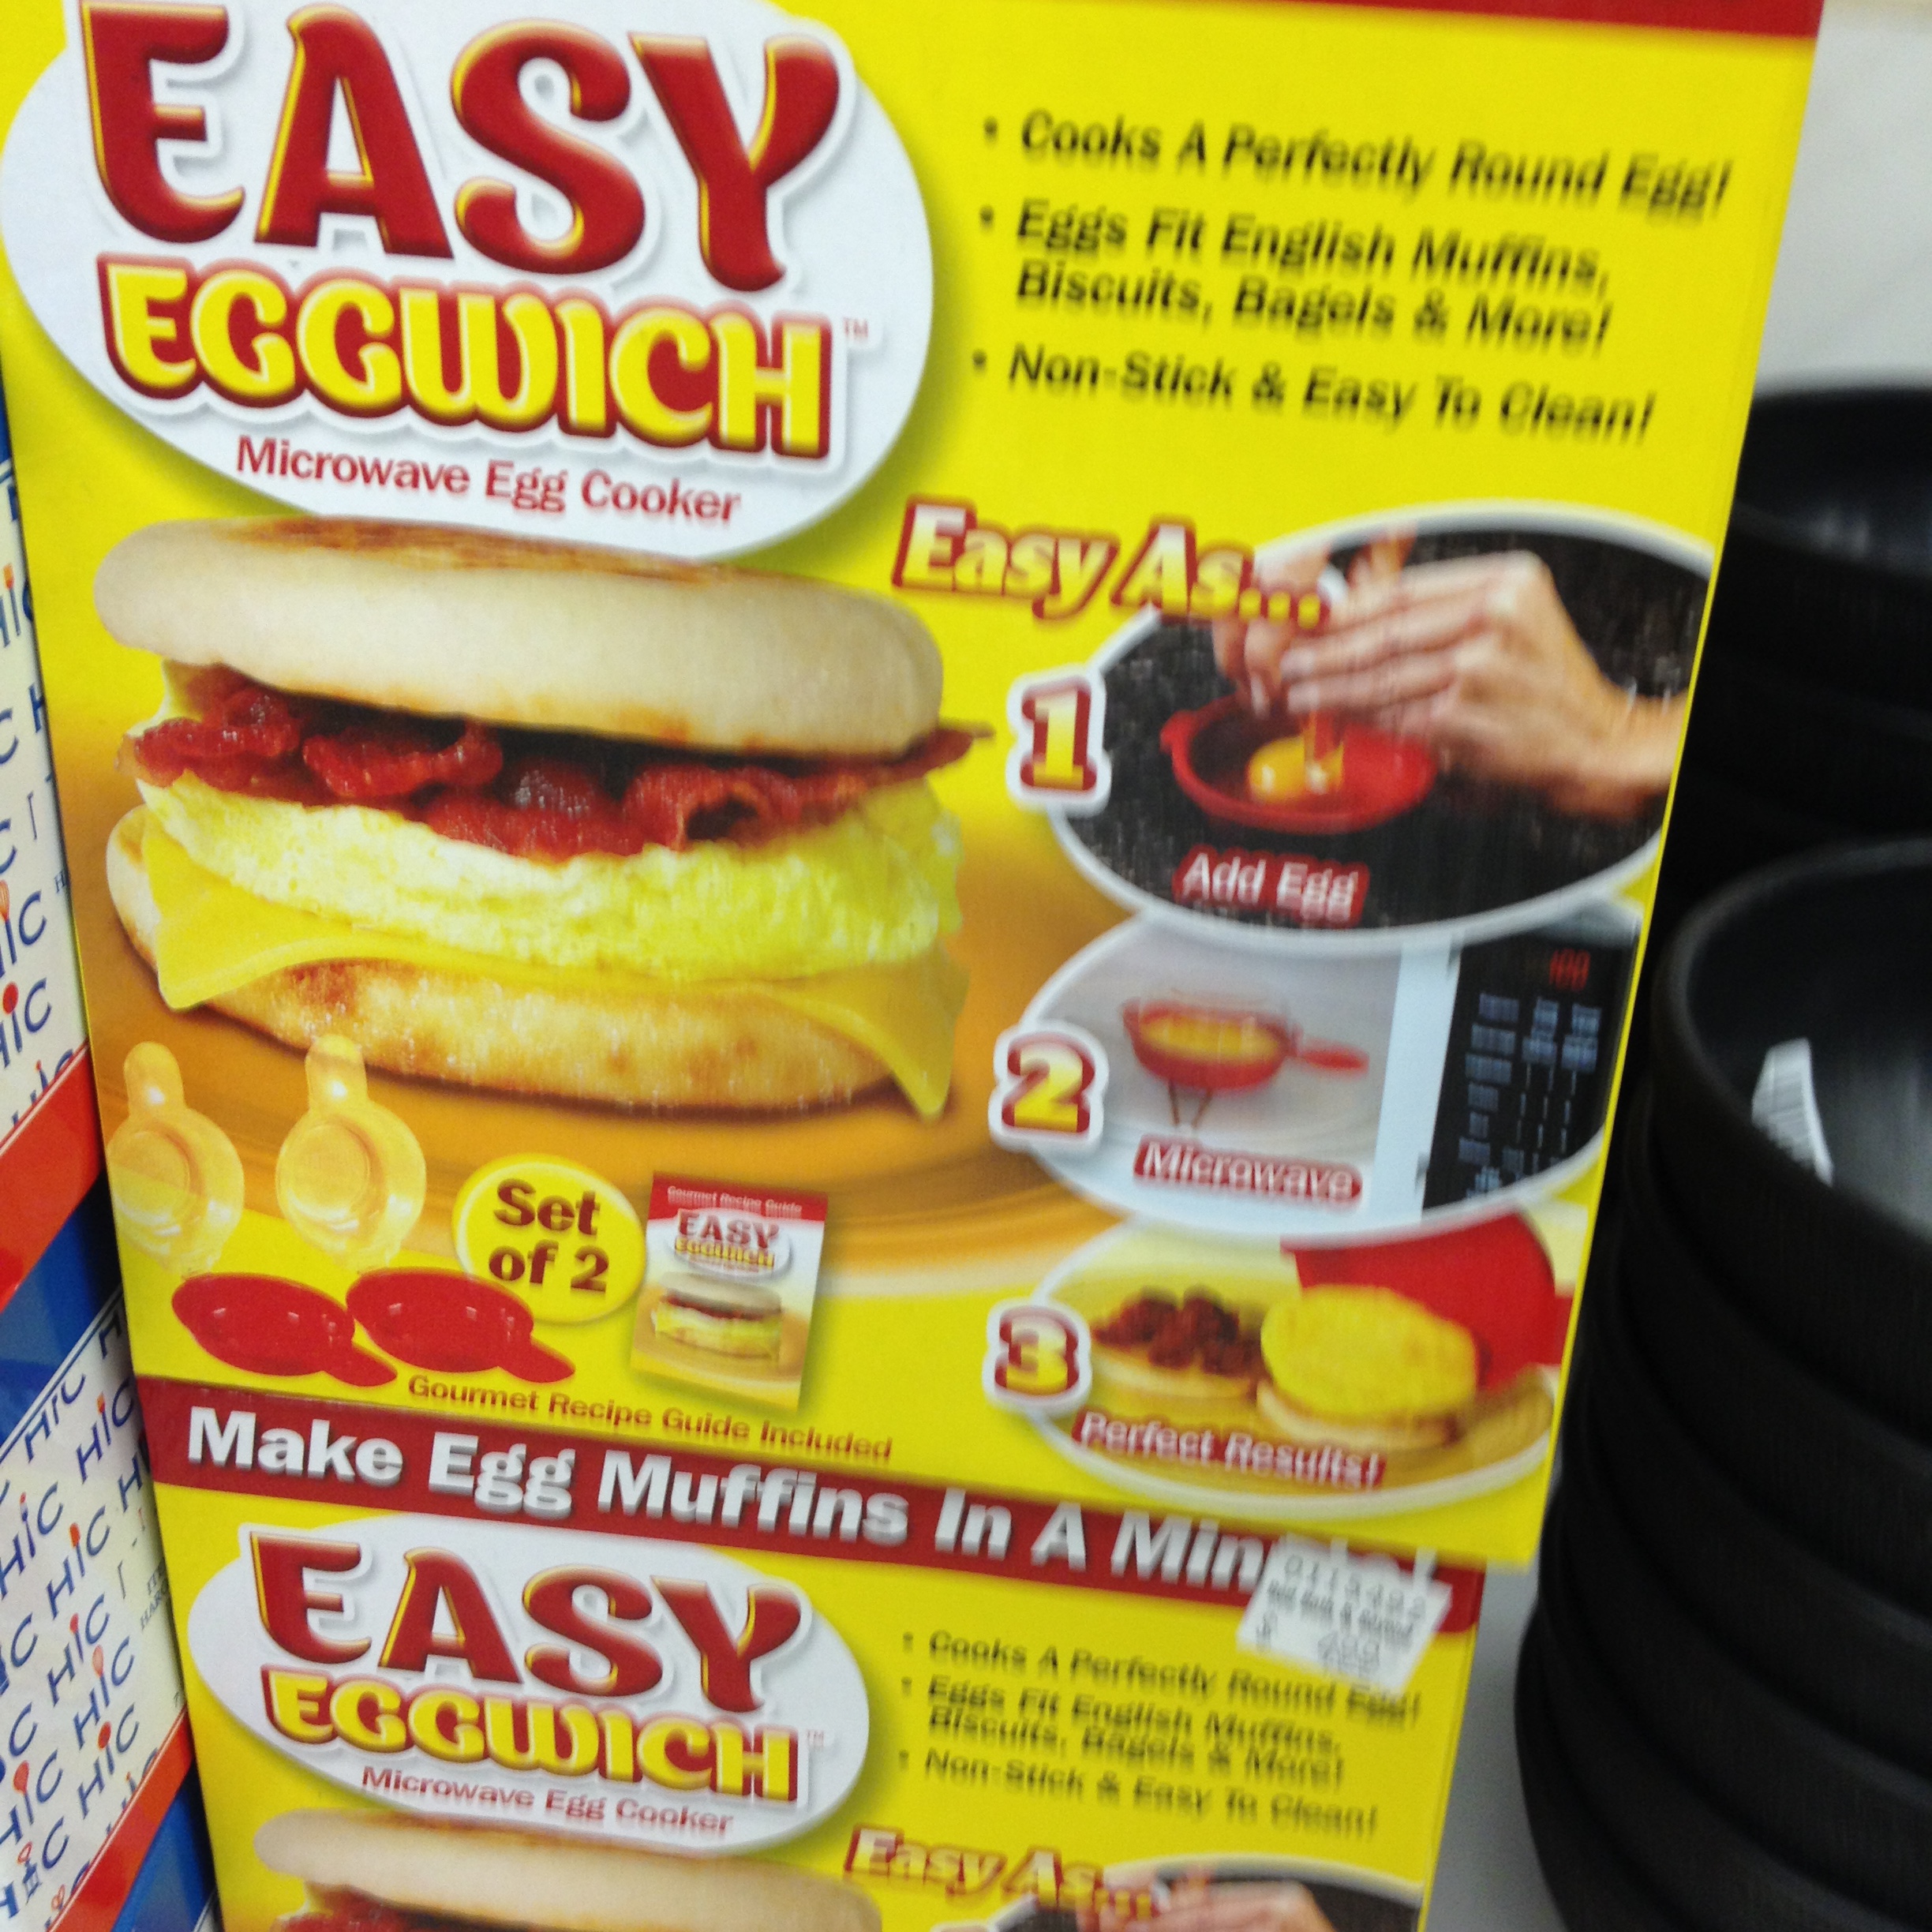 fast food - Easy Eggwich Cooks A Perfectly Pound E EssFit English Murrins, Biscuits, Basels & Marel Non Stick & Easy To Clean Microwave Egg Cooker Easy Ad A E Ind Set of 2 Die Hediya Make Egg Muffins In A Minh Easa Eggusicm We